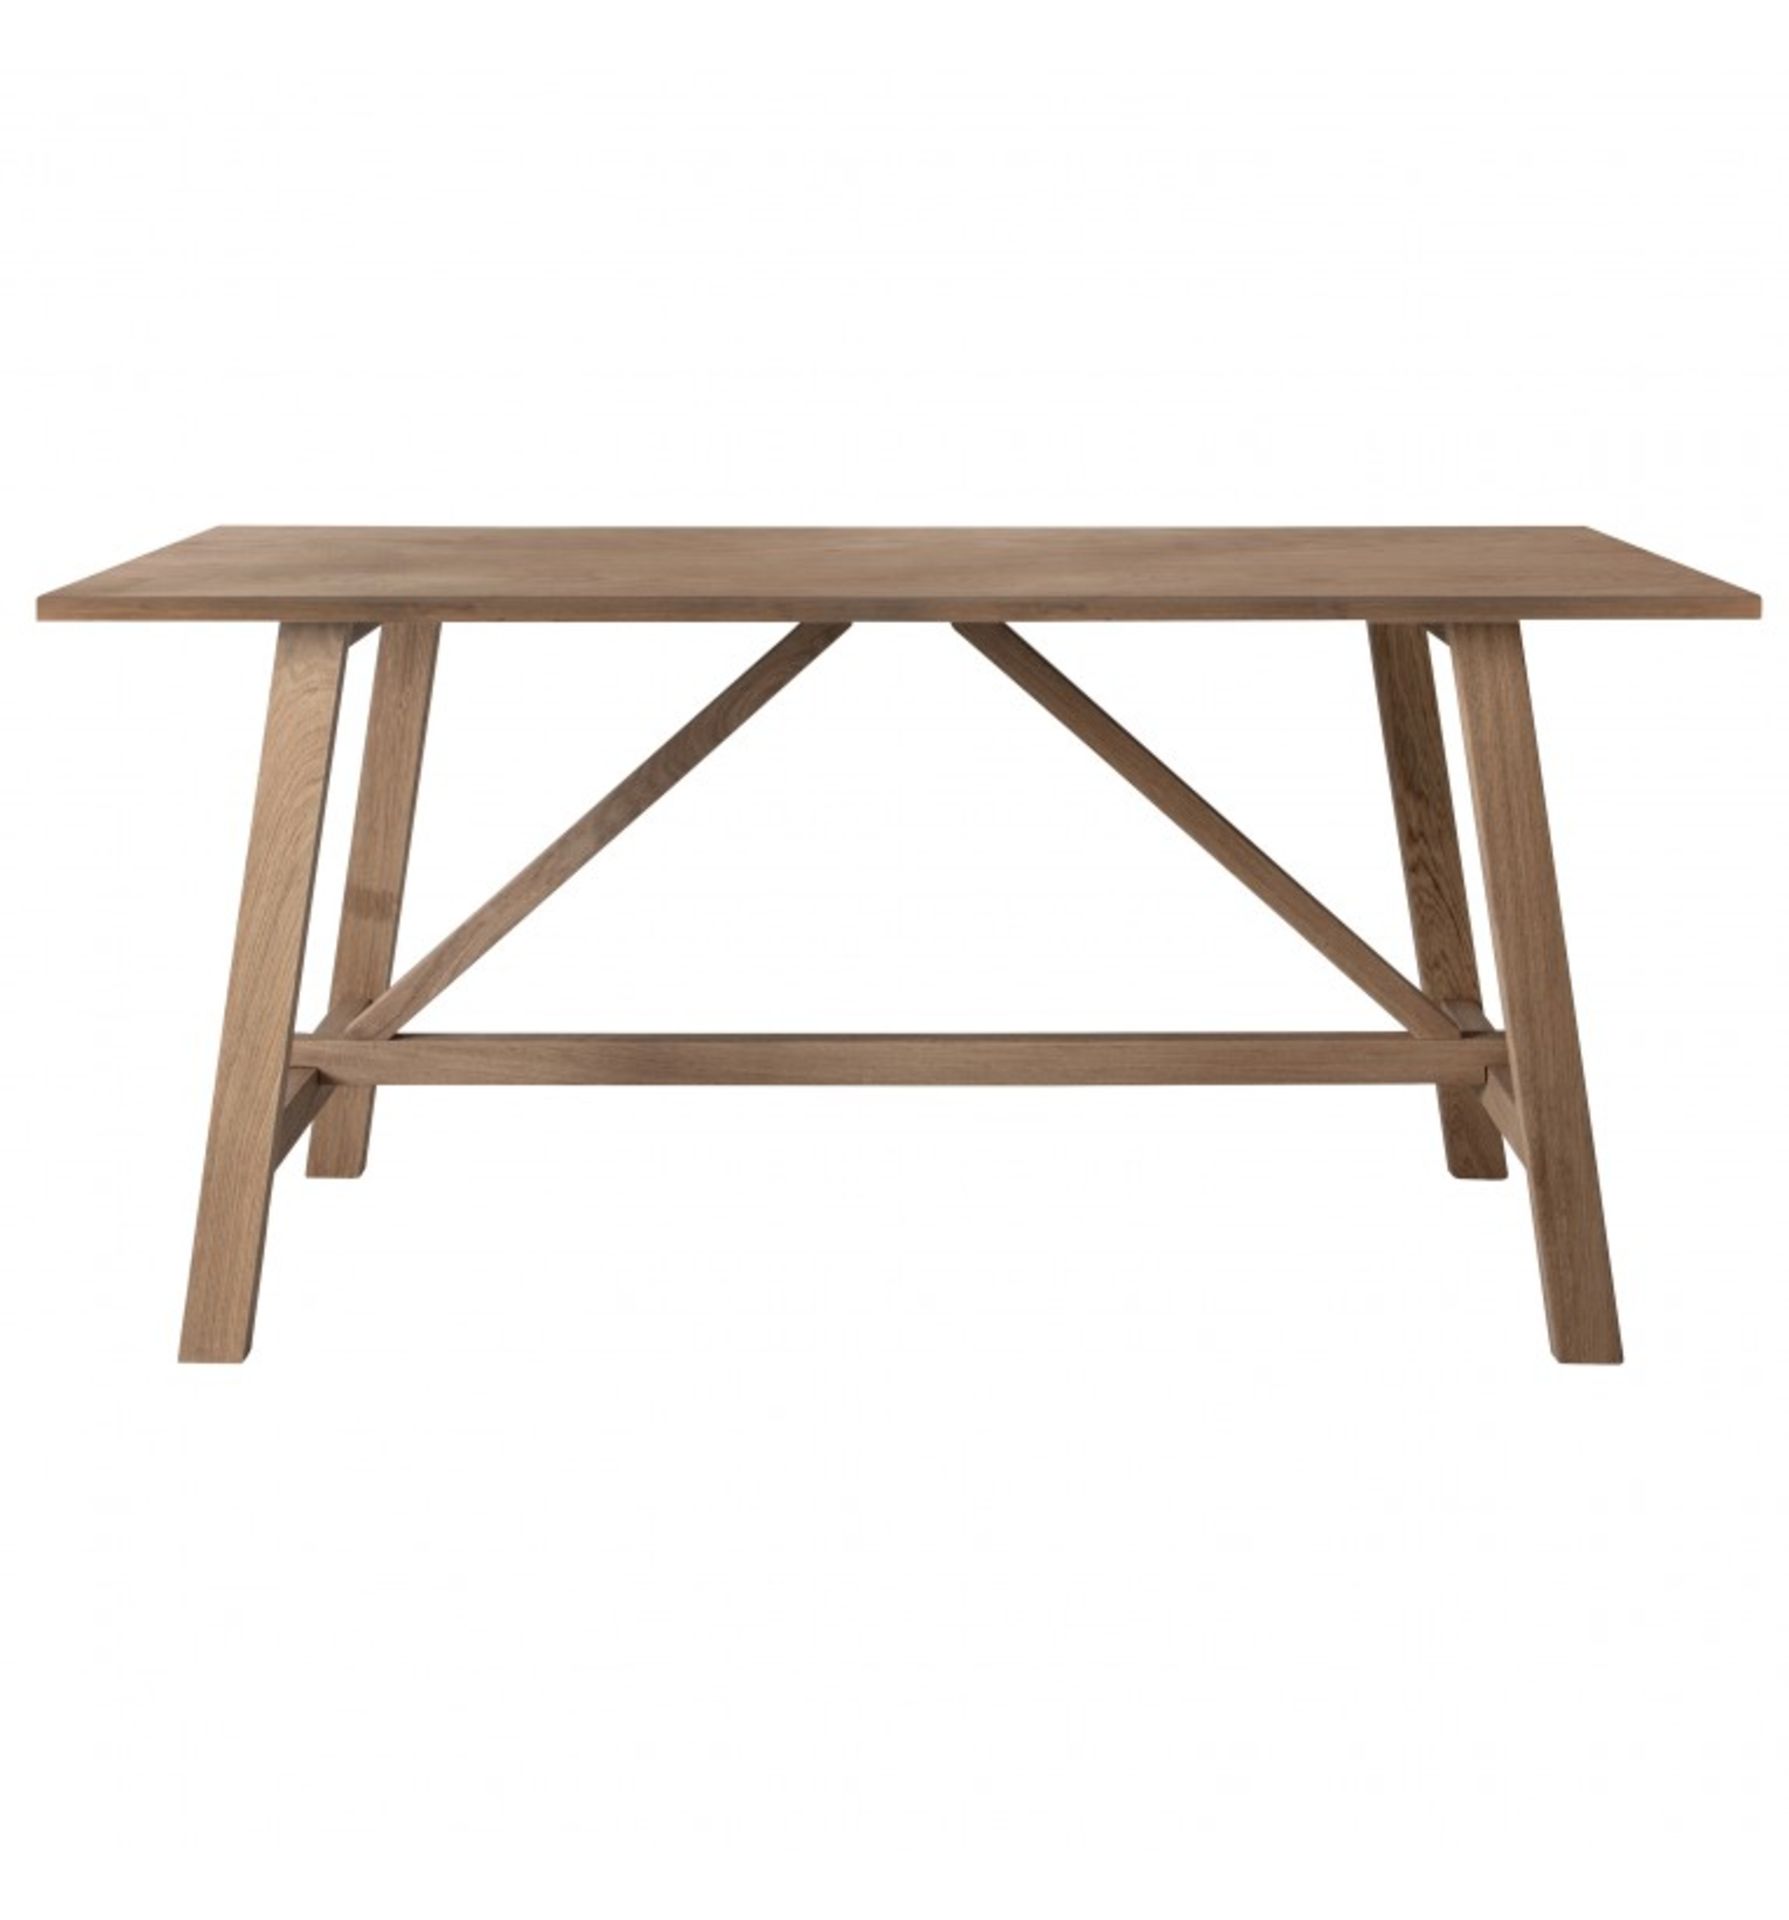 Clapham Dining Table Oak The Clapham dining table is made of the finest solid oak, offering both a - Image 3 of 3